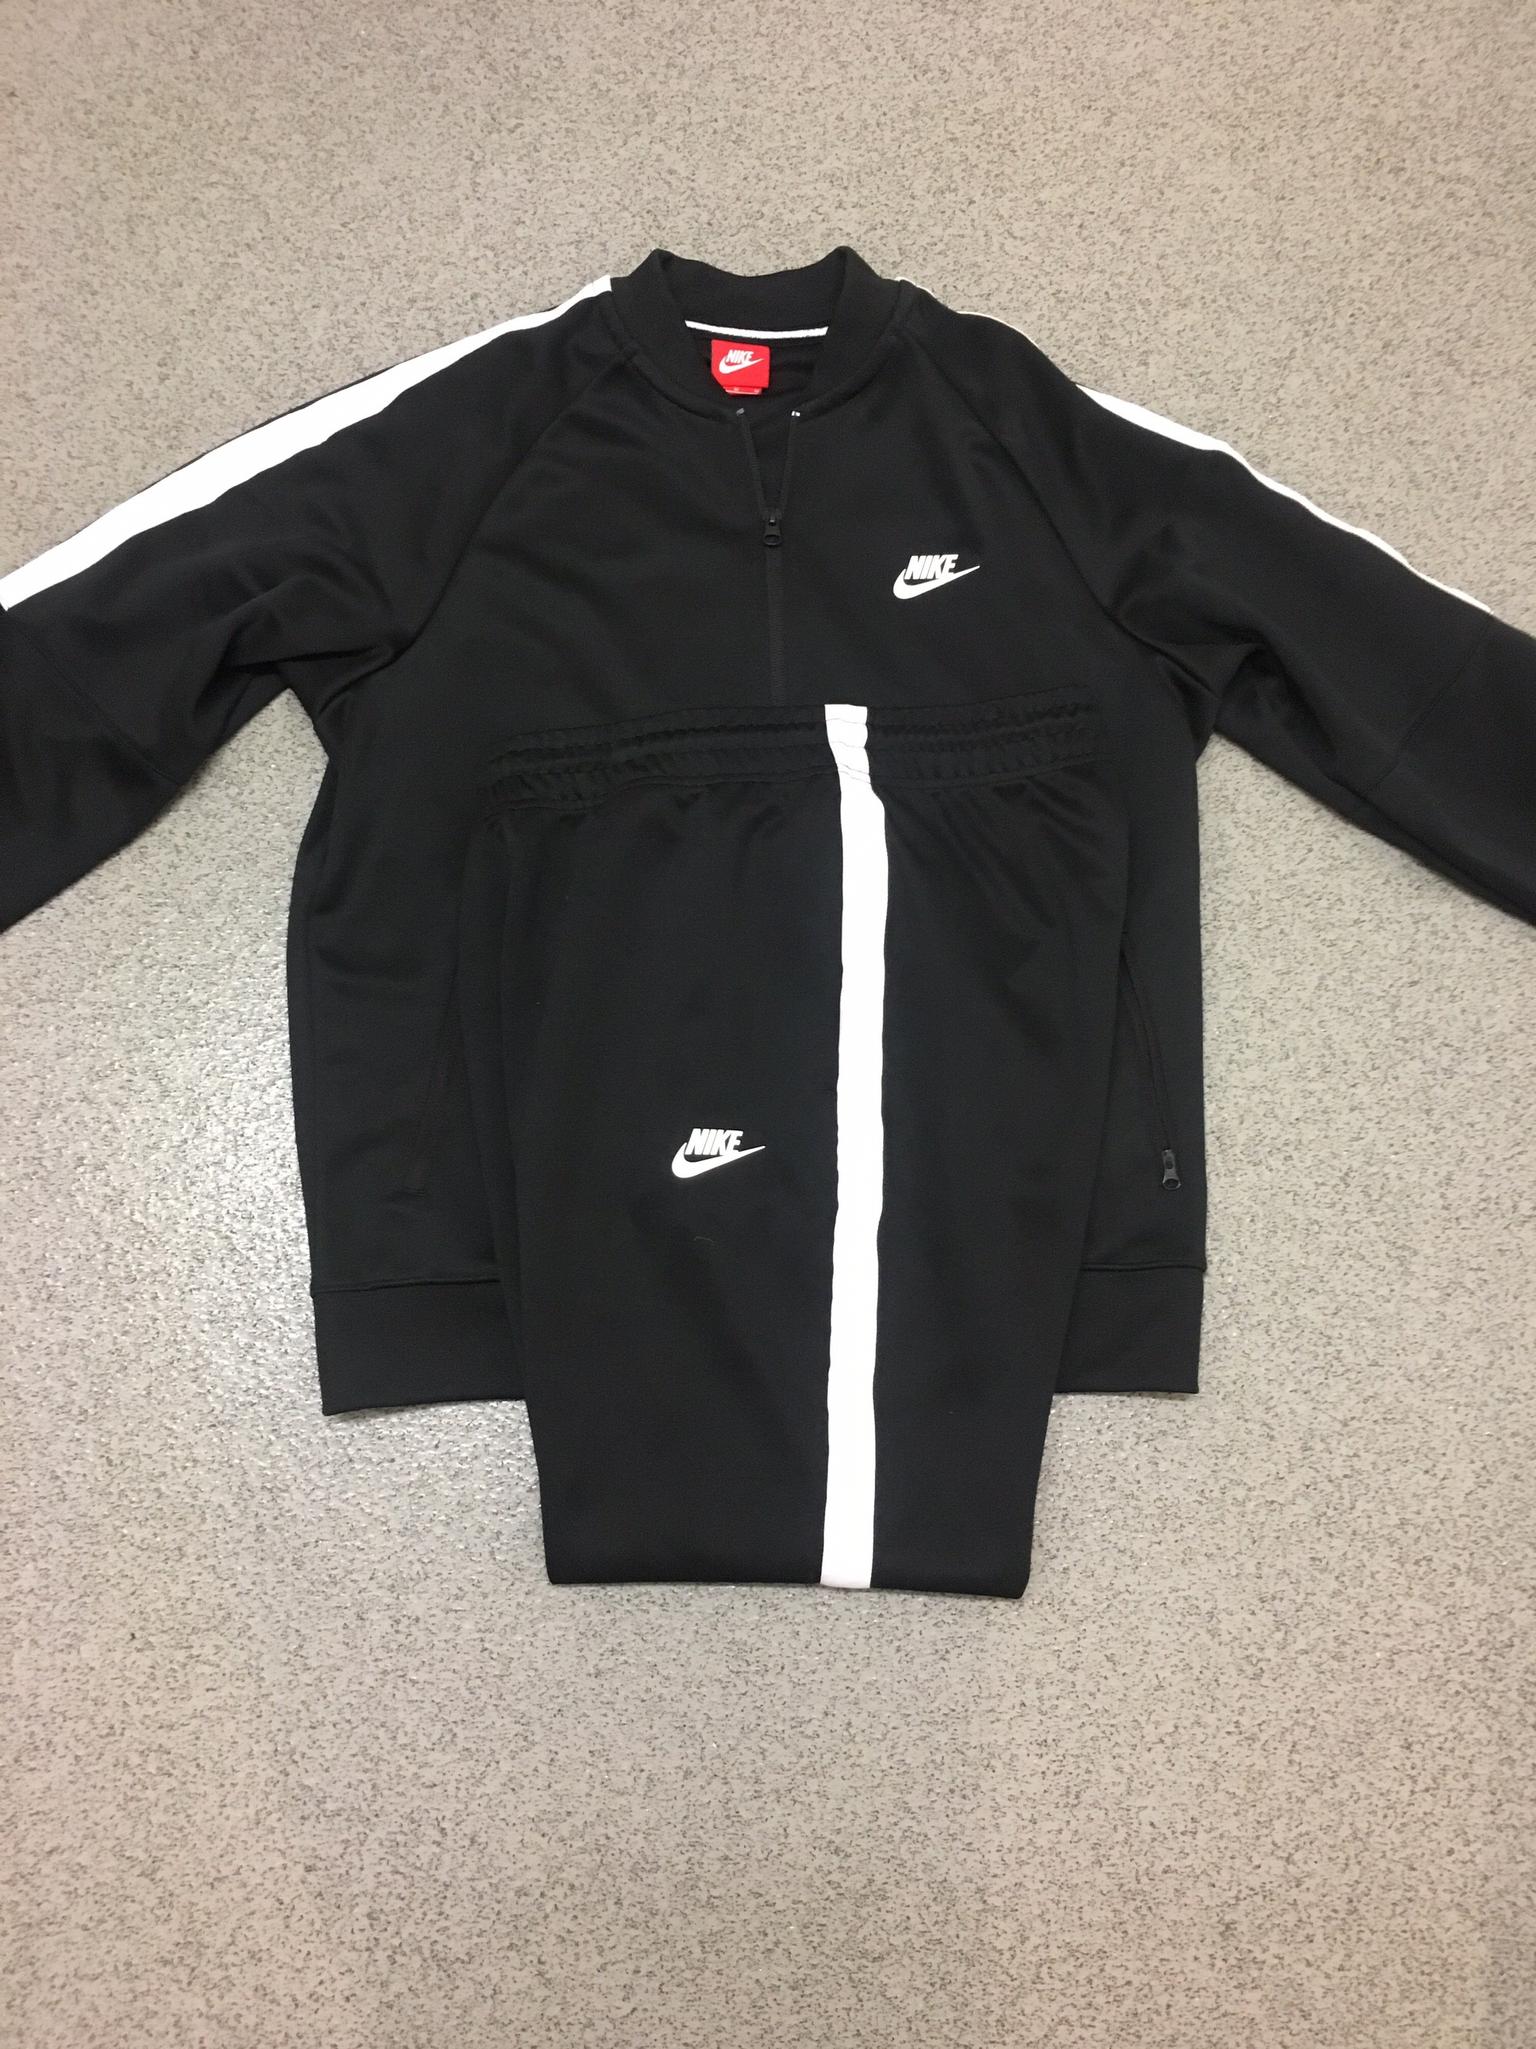 mens black and white nike tracksuit